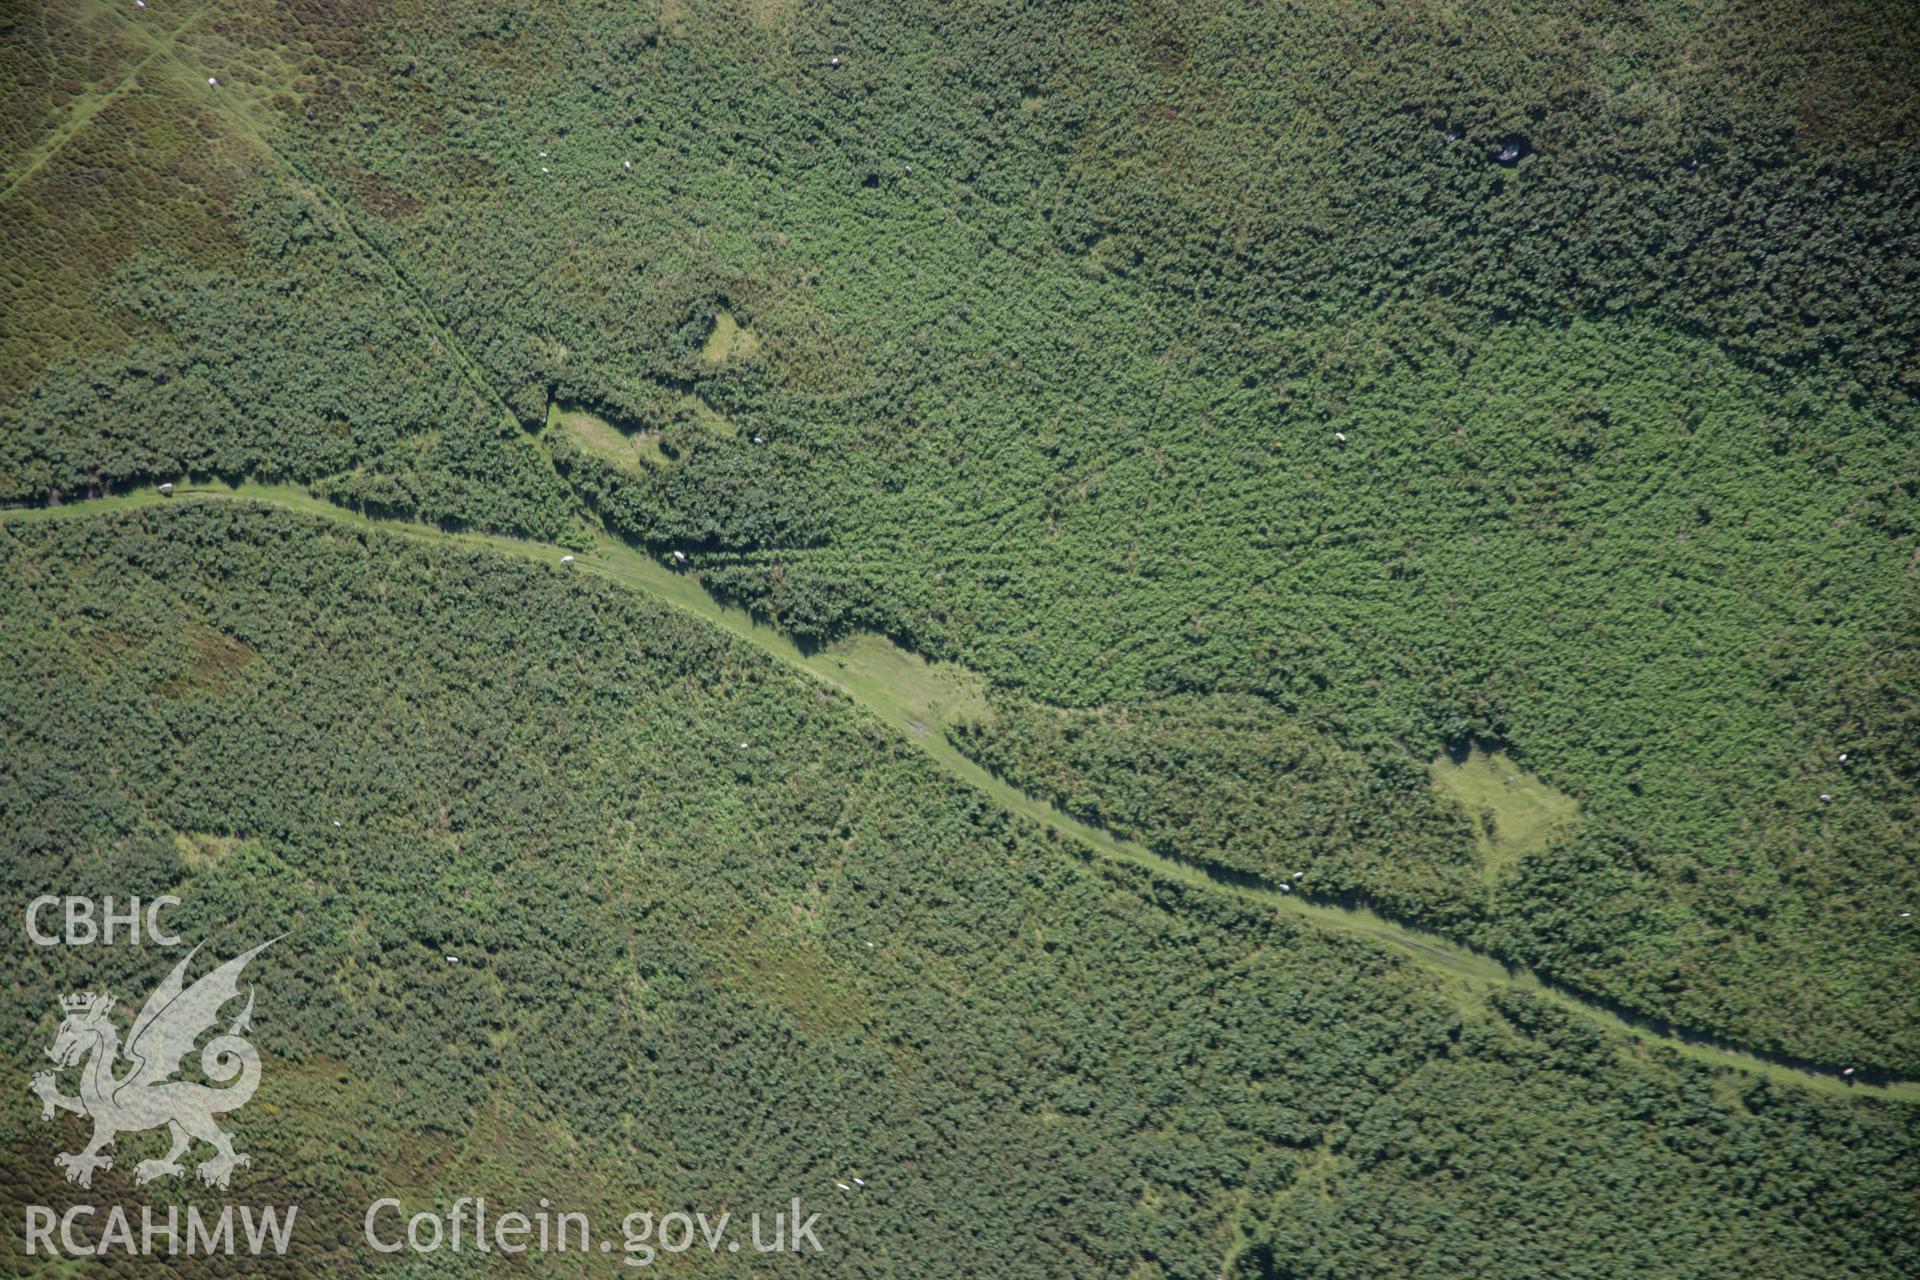 RCAHMW colour oblique aerial photograph of Cwmhindda Deserted Rural Settlement. Taken on 08 August 2007 by Toby Driver